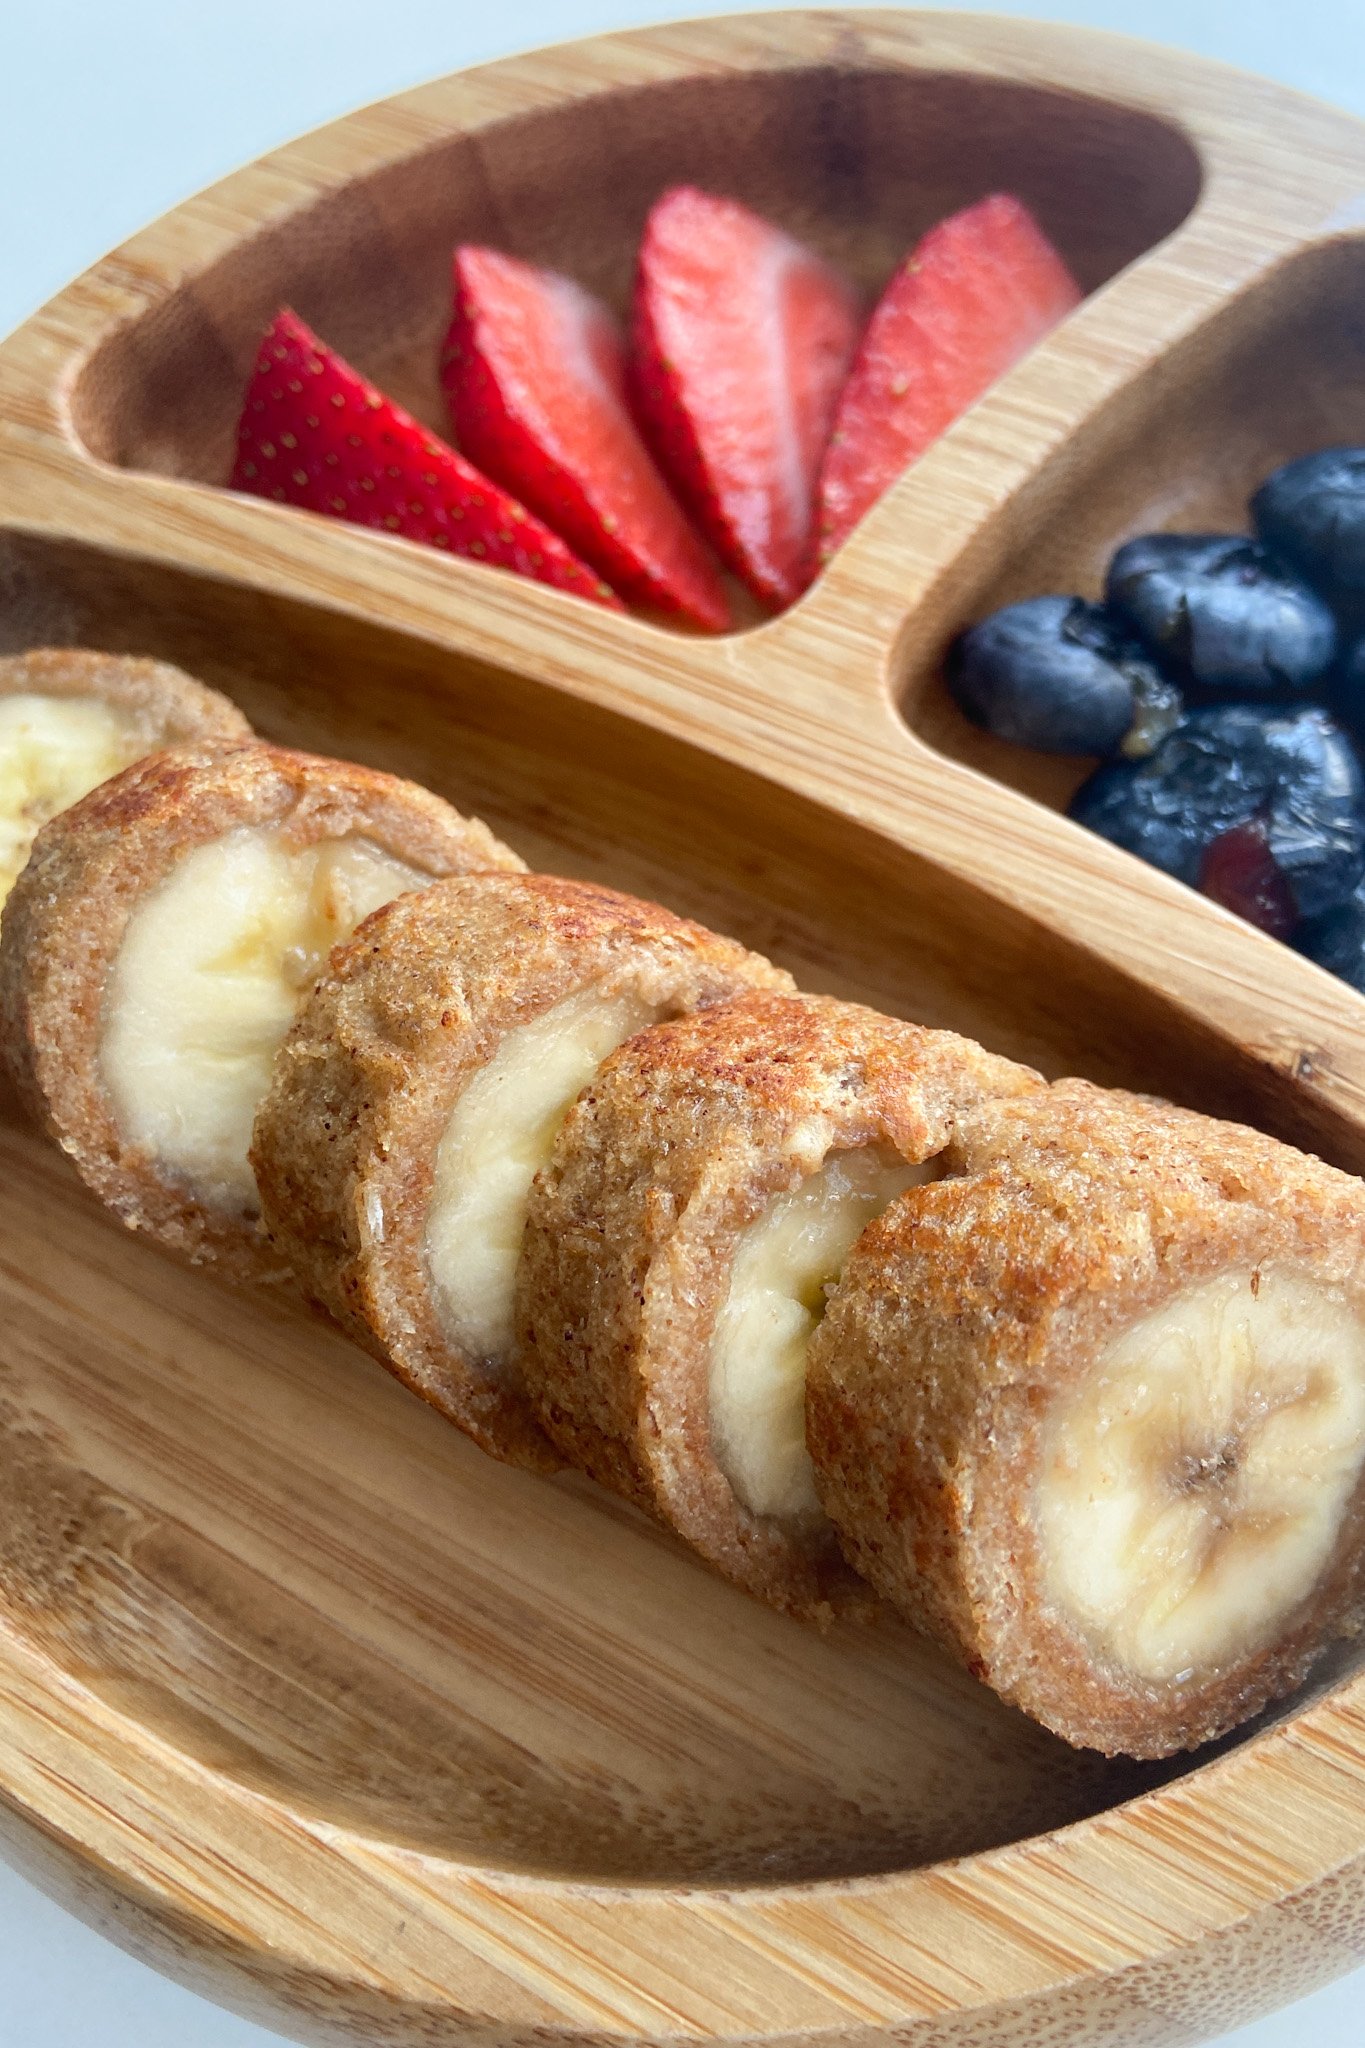 Peanut butter and banana French toast roll ups. Served with sliced strawberries and blueberries.